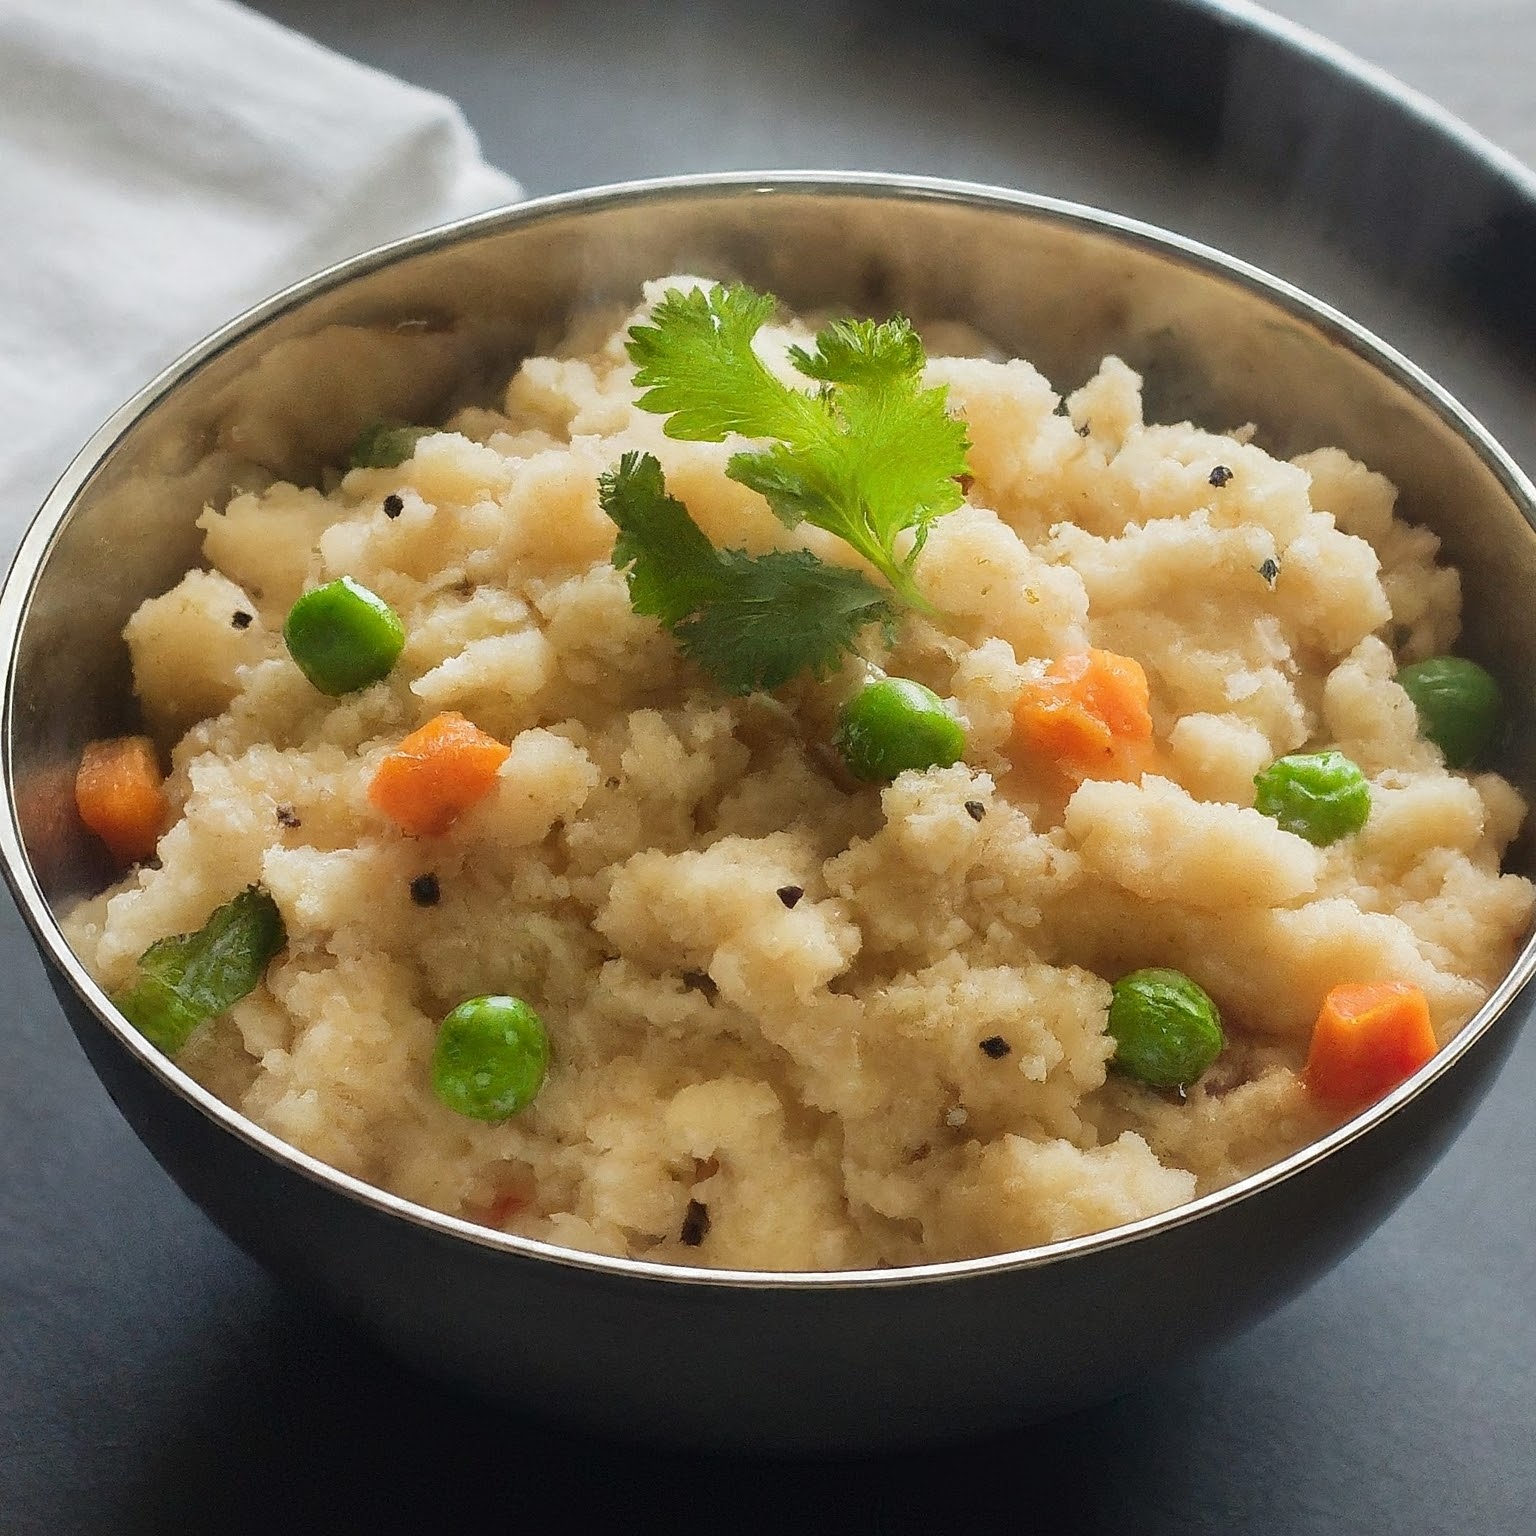 Steaming bowl of Rava Upma, a South Indian breakfast dish with semolina, vegetables, and spices.